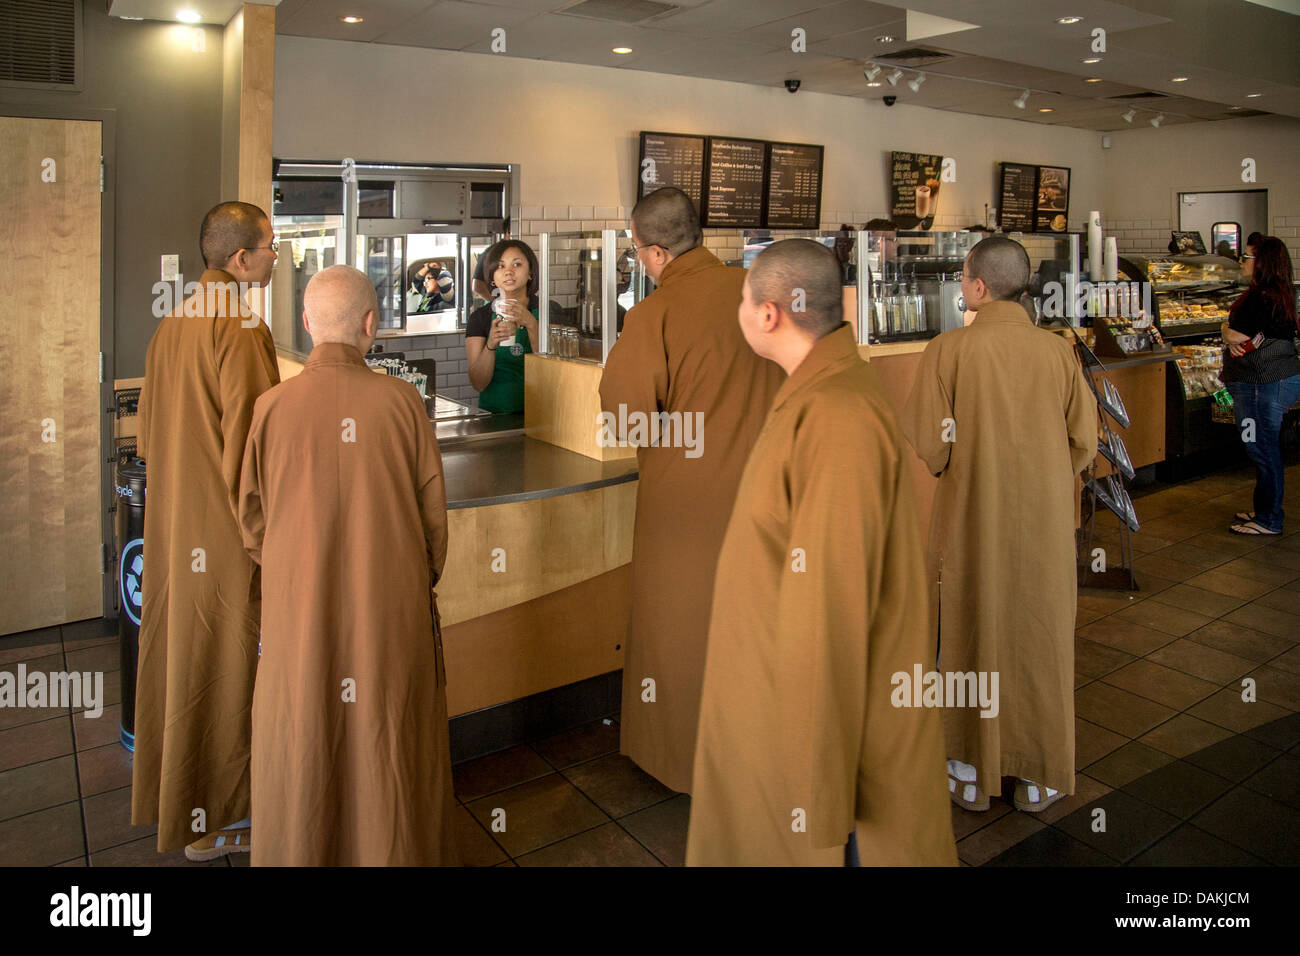 Contrasting with their surroundings, three Buddhist monks and one nun in brown robes and shaved heads, buy drinks in Starbucks. Stock Photo